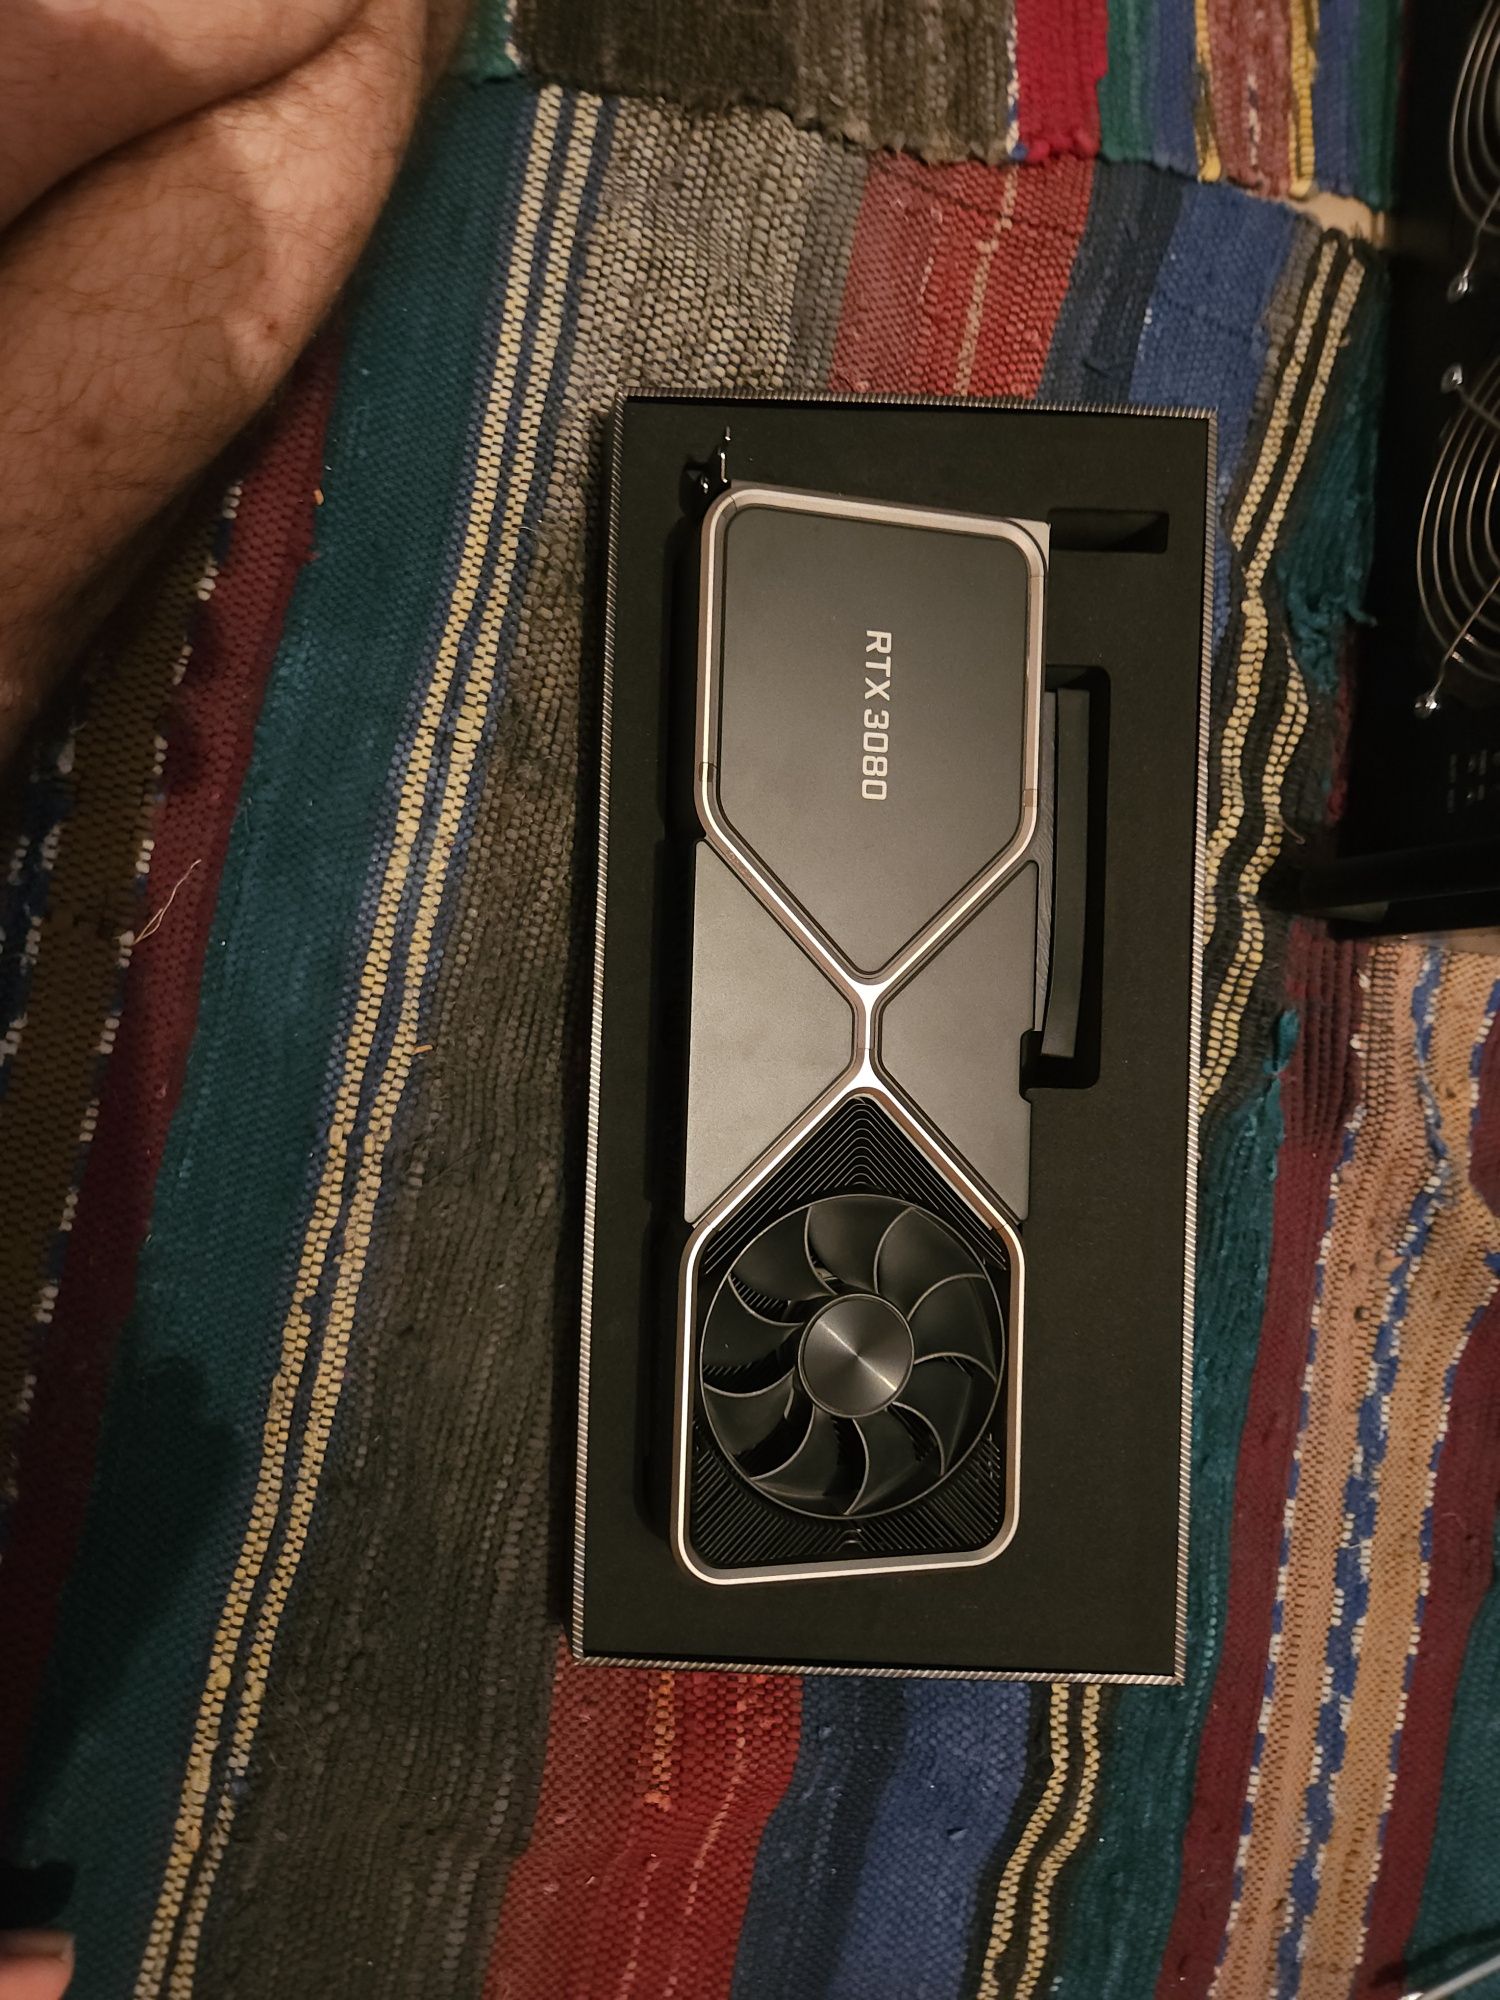 Mining ring 4-rtx3080 10GB Founders edition